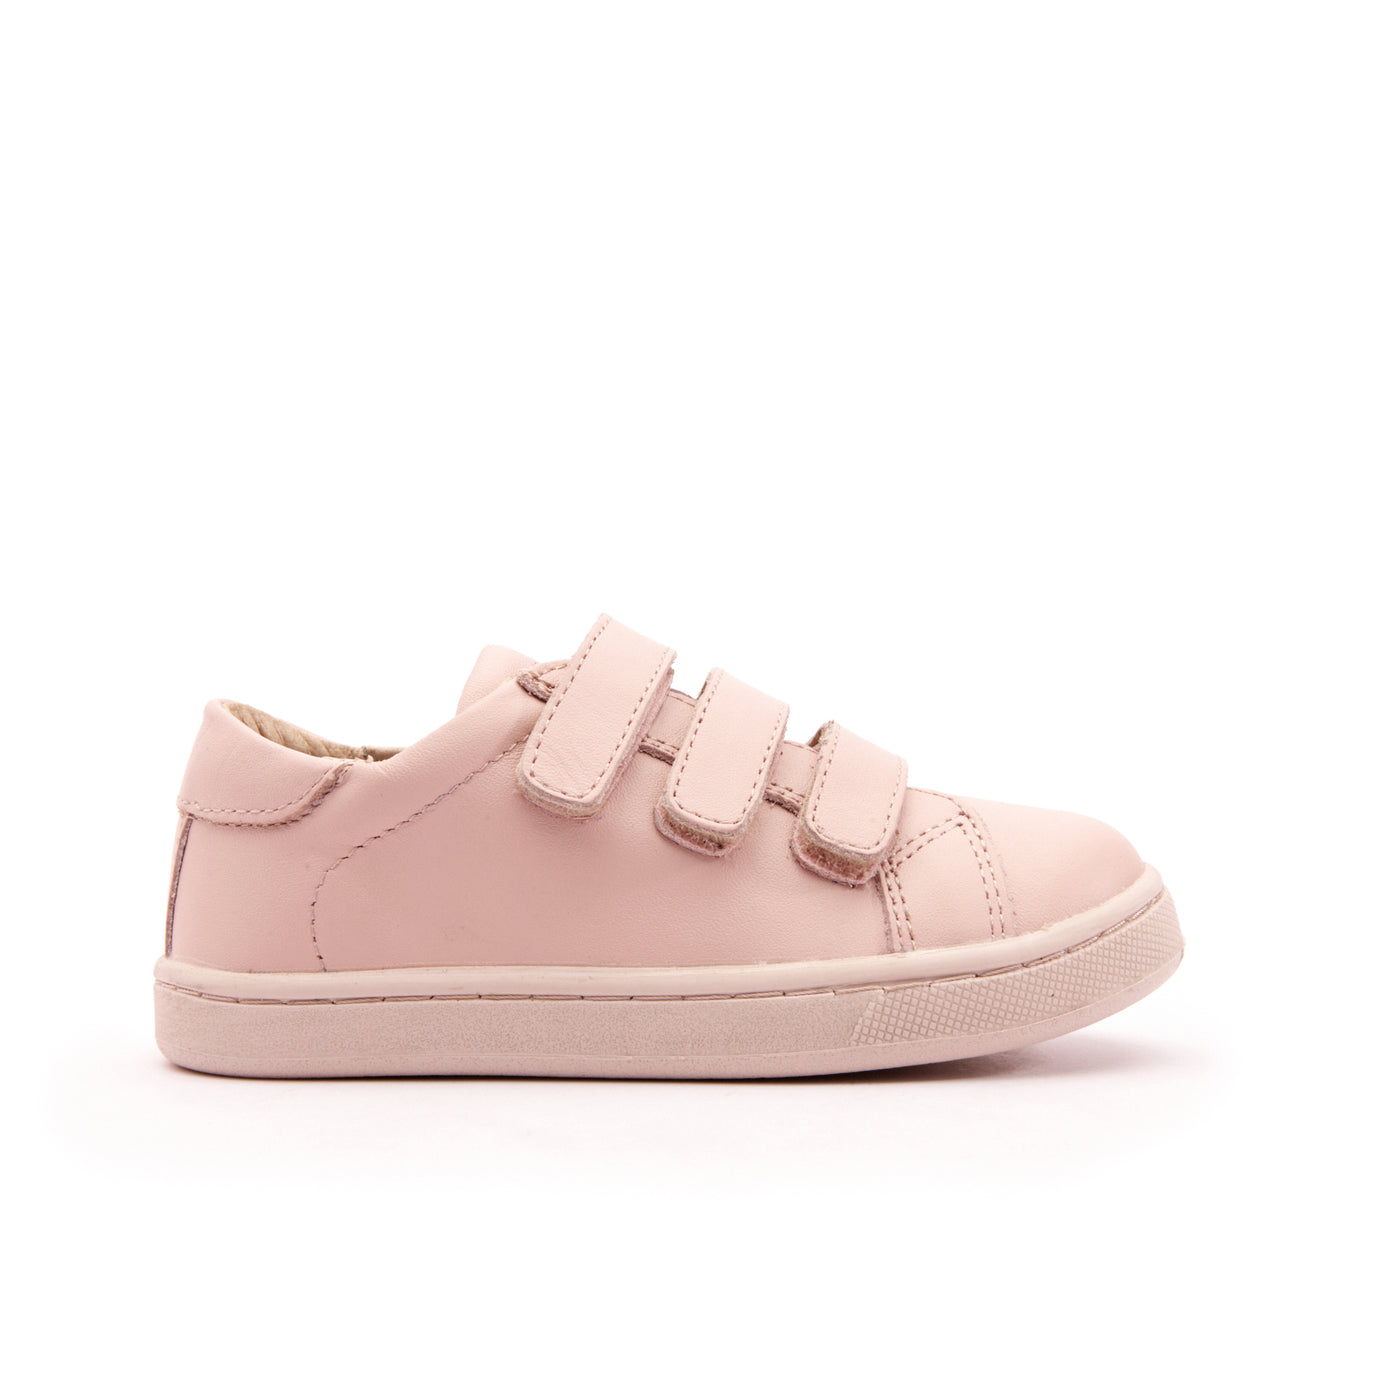 OLD SOLES Kids Girl Boy Step Markert Leather Sneakers in Powder Pink / Pink Sole